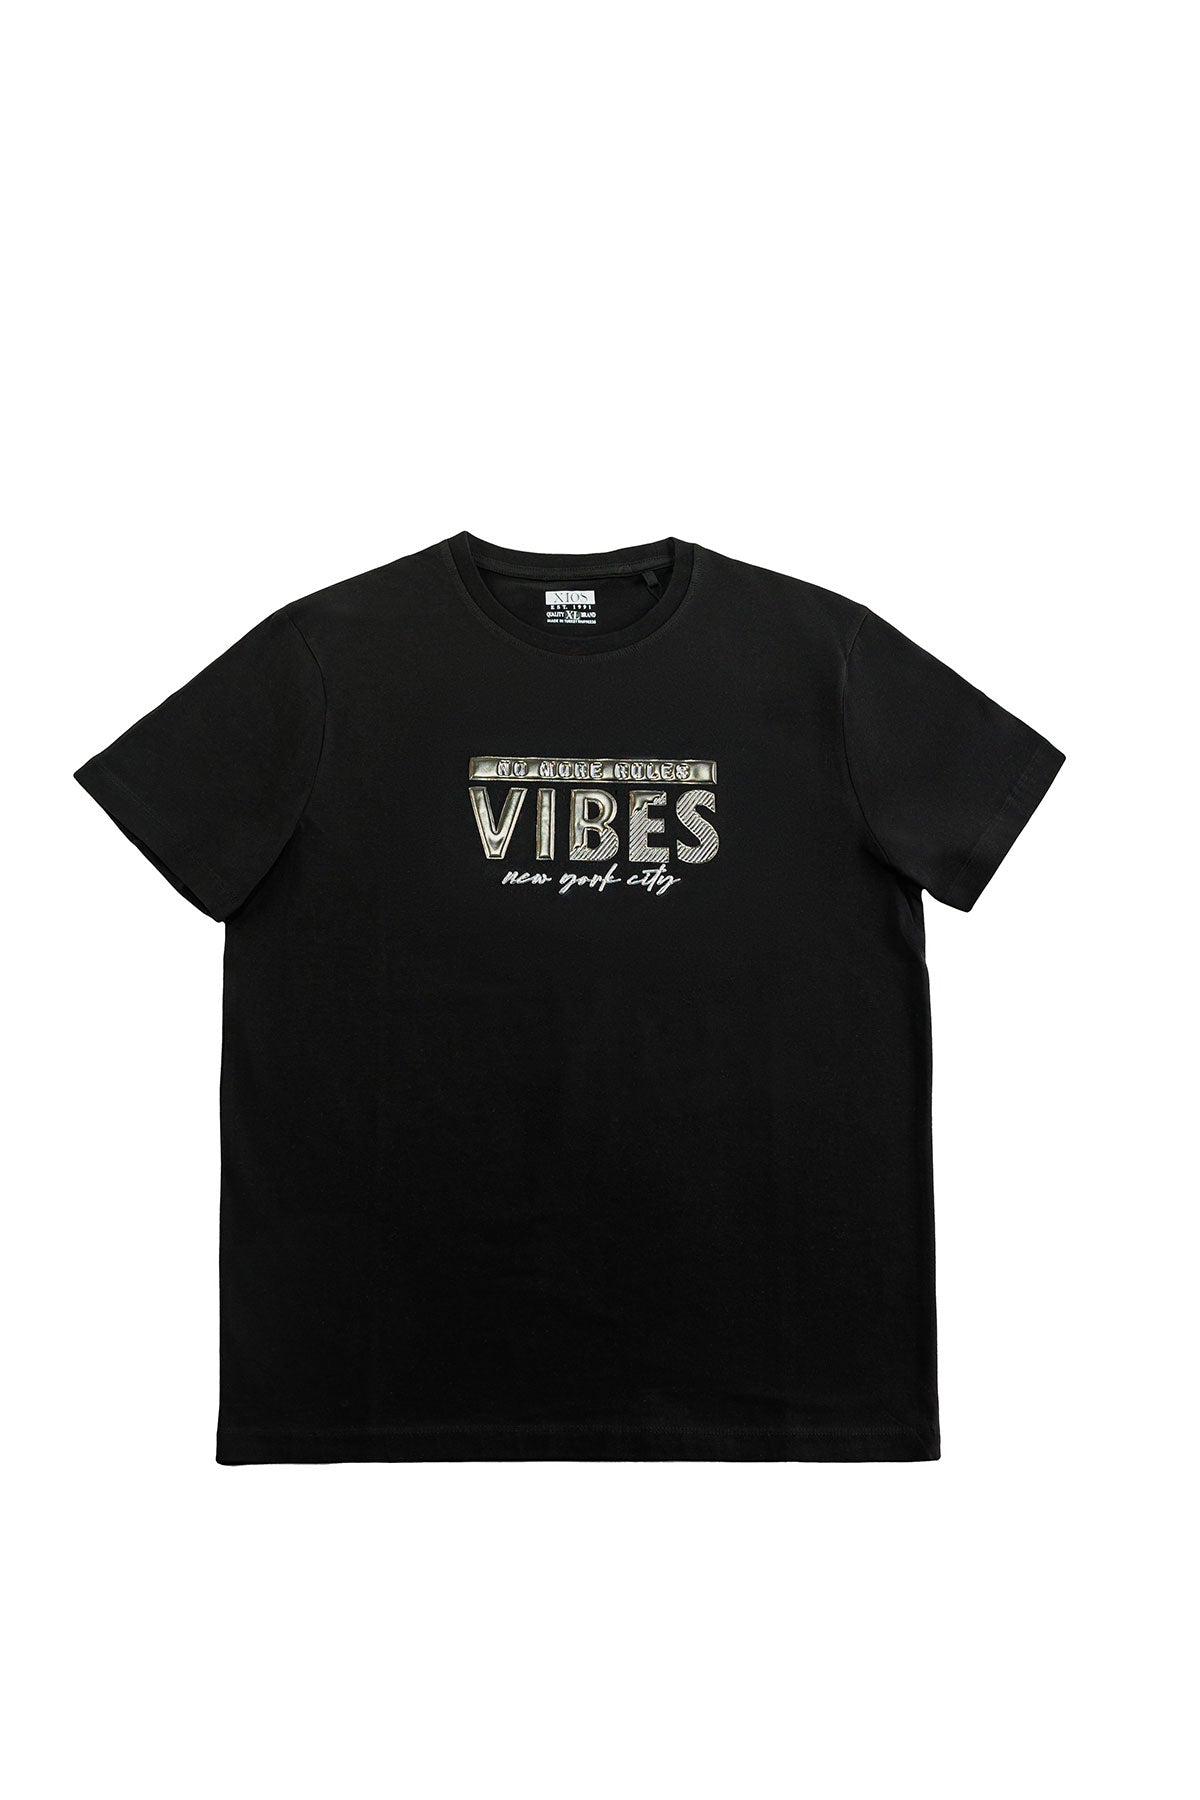 "No More Rules Vibes" Graphic Tee